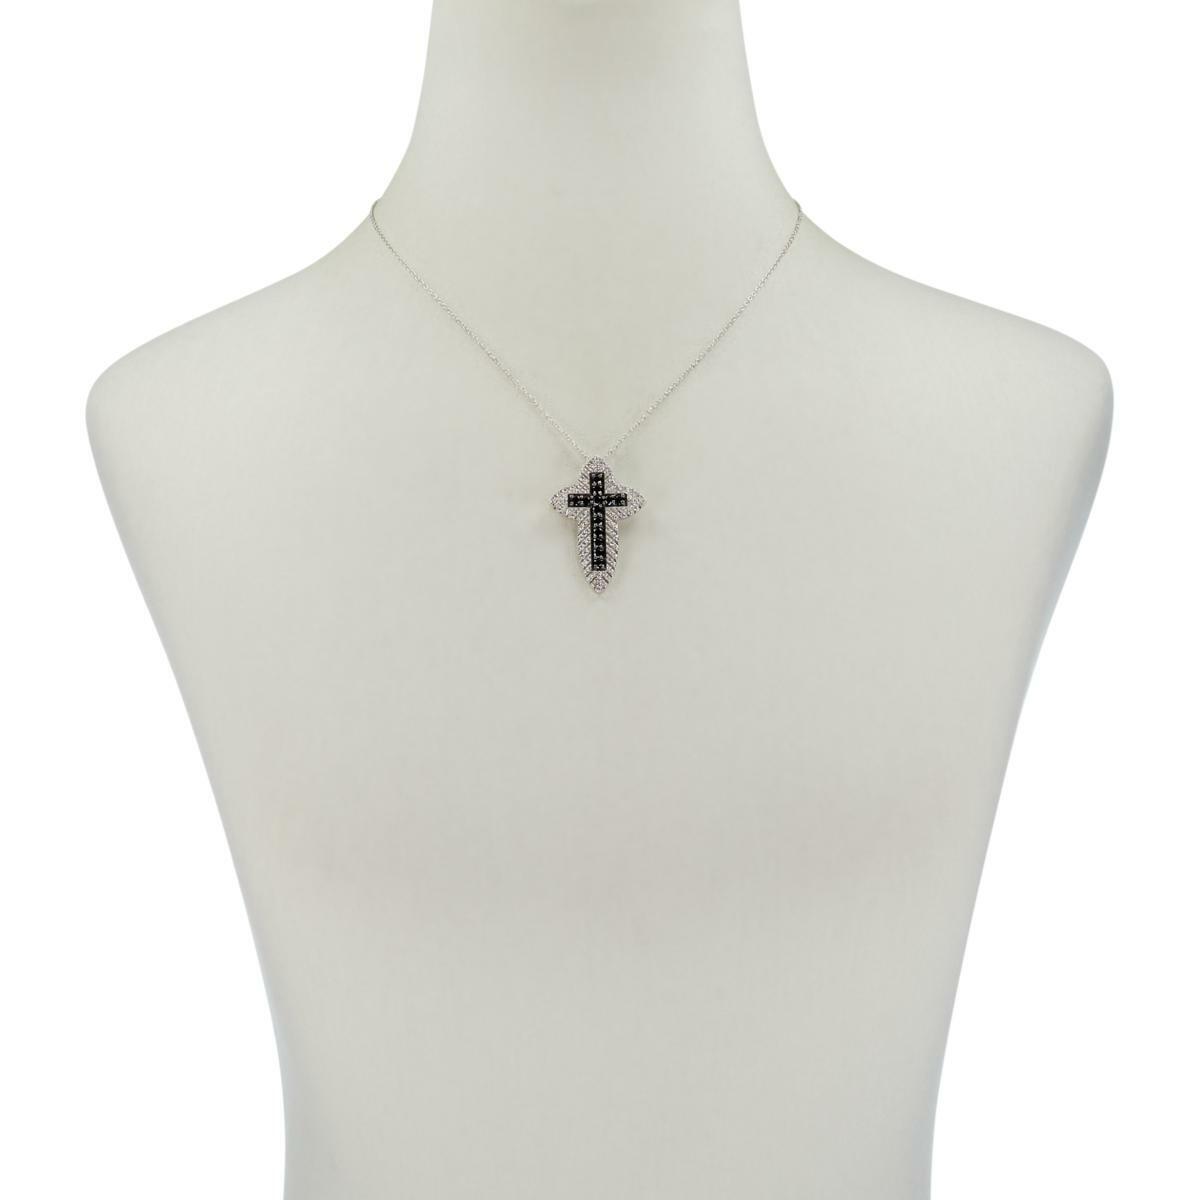 Colleen Lopez Black Spinel and White Zircon Cross Pendant with Chain